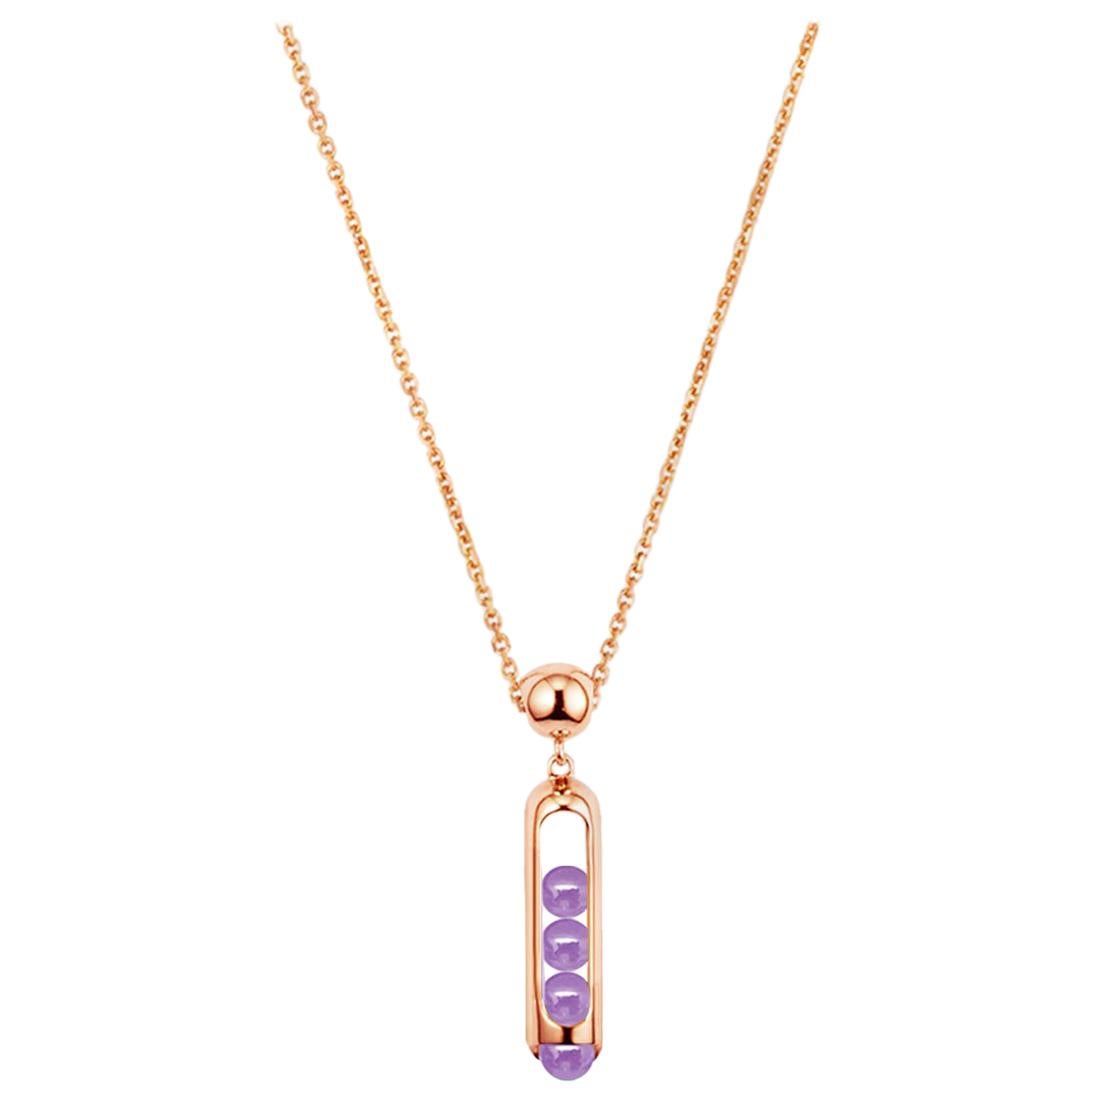 Melody Chain Pendant Necklace 18 Karat Rose Gold Purple Amethyst beads For Sale